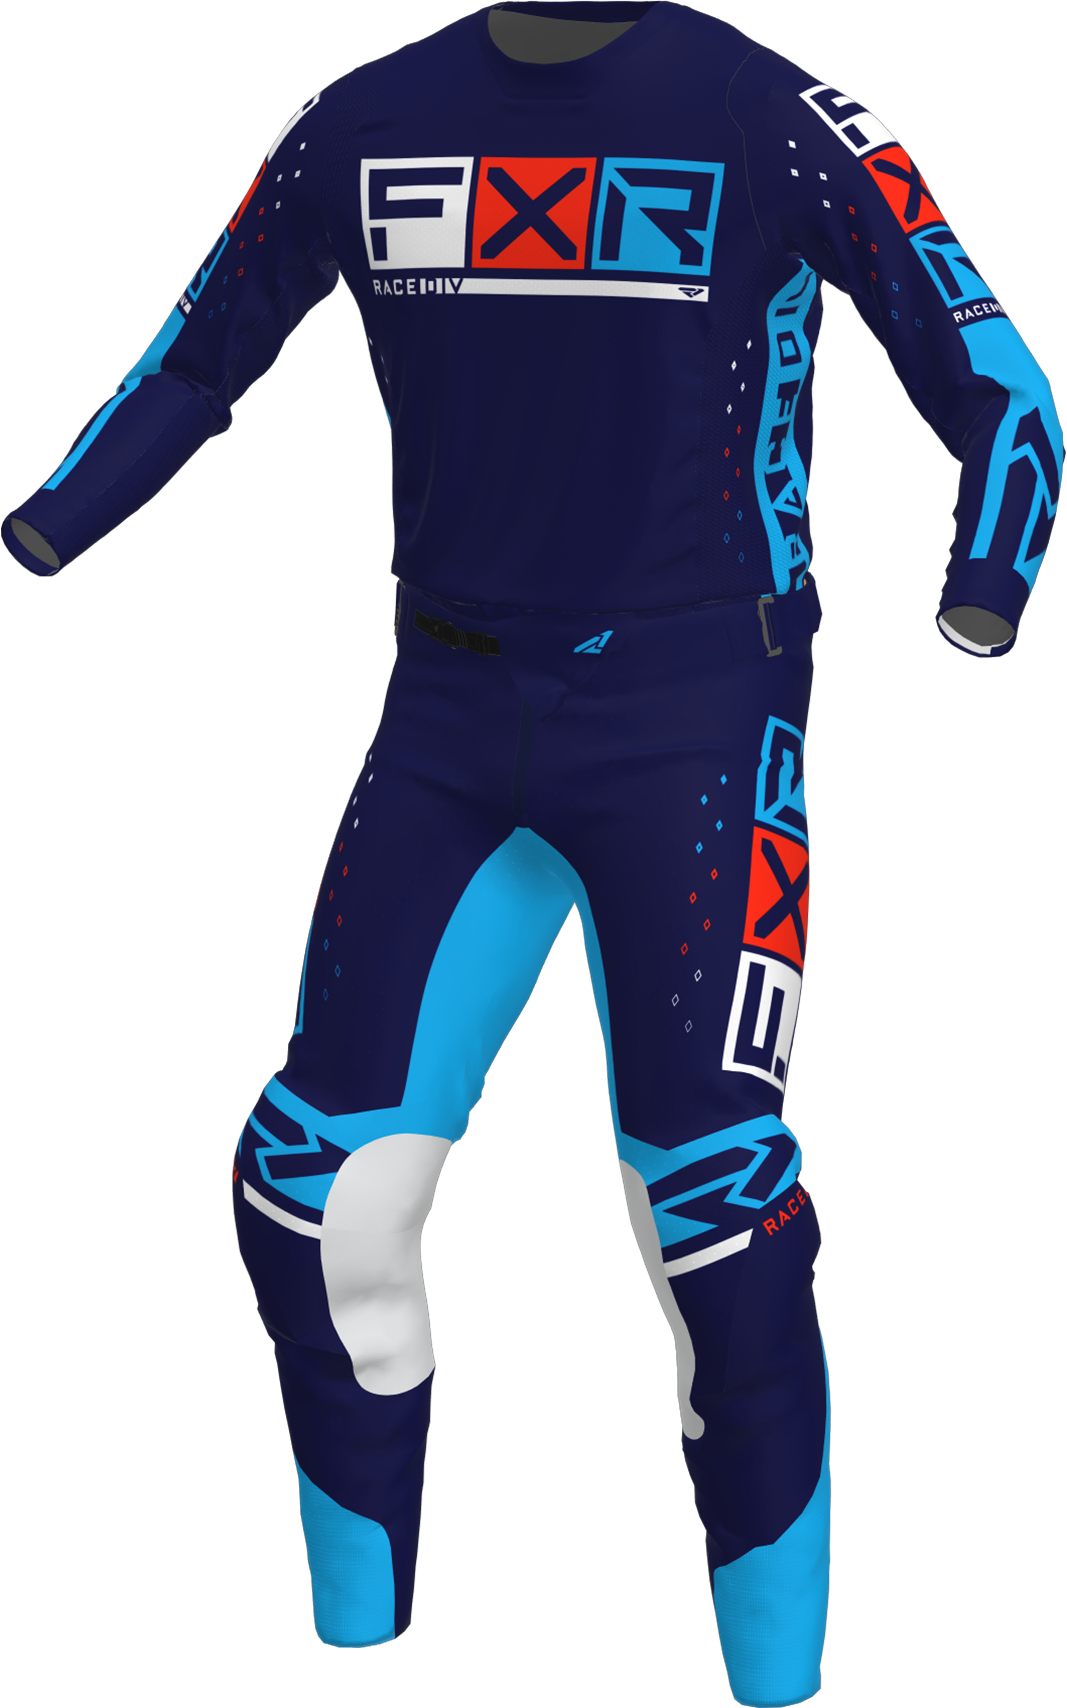 A 3D image of FXR's Podium Pro LE MX Jersey and Pant in Navy/Cyan/Red colorway